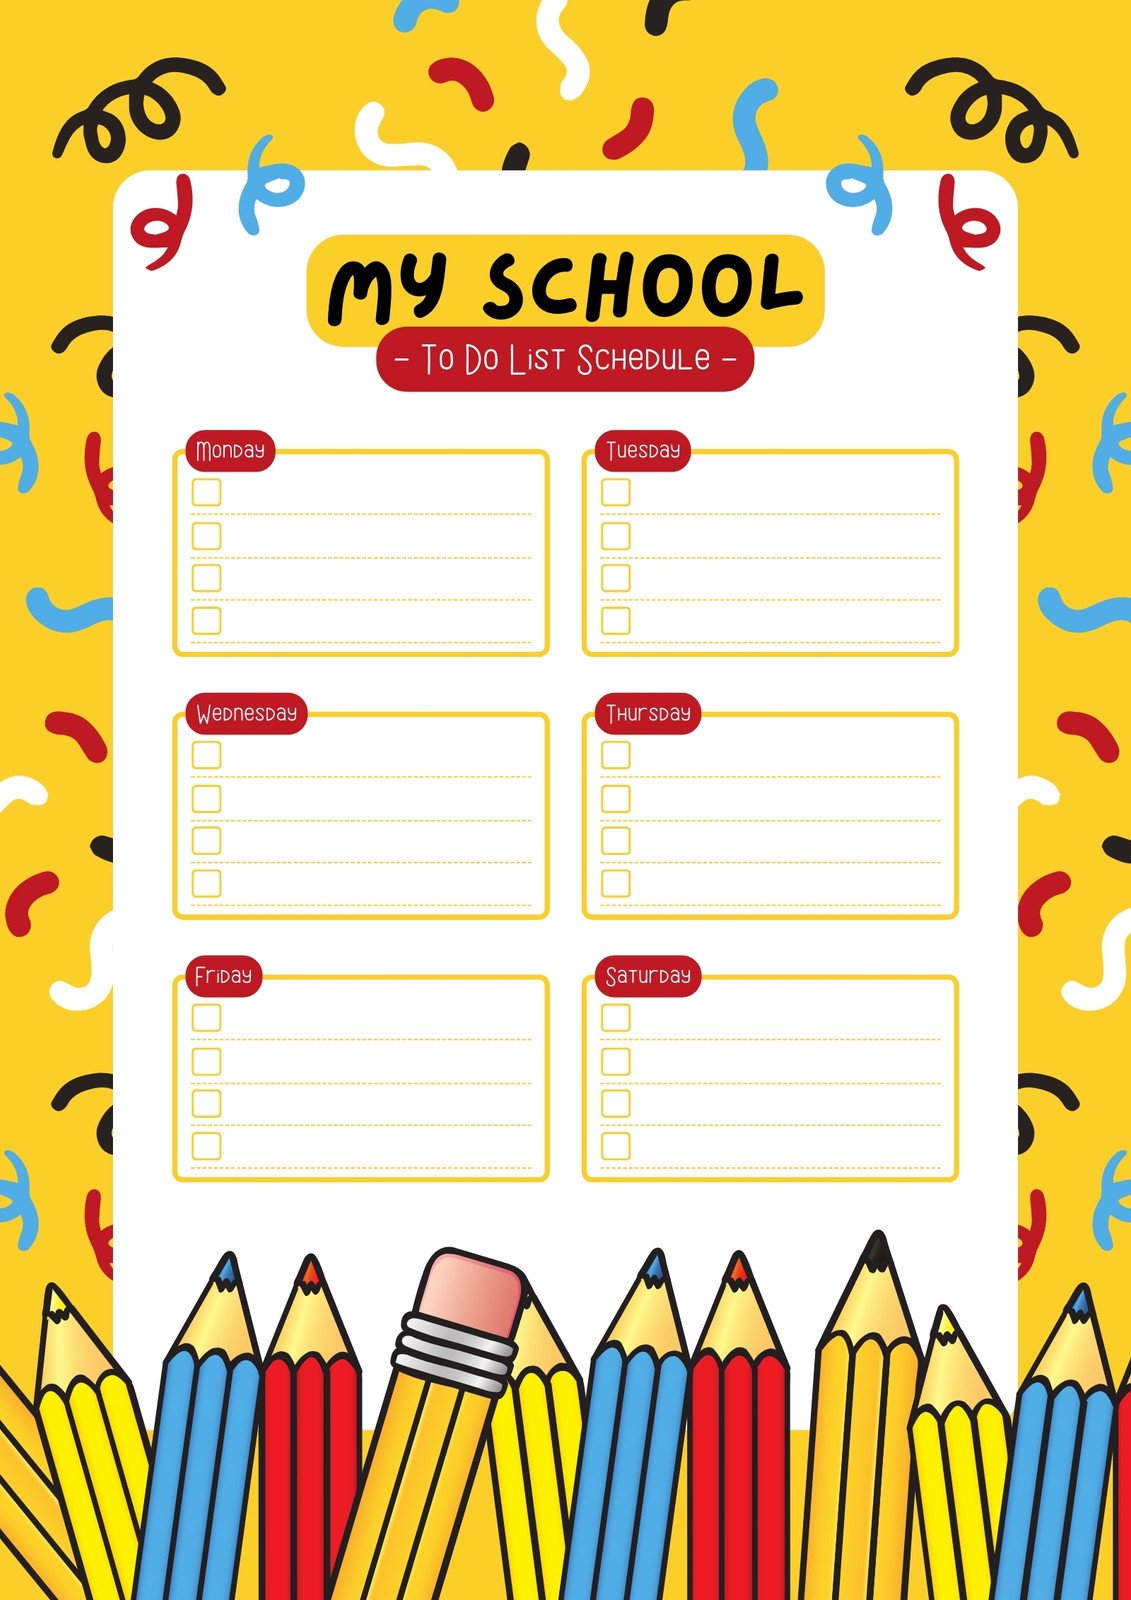 Free and customizable school templates